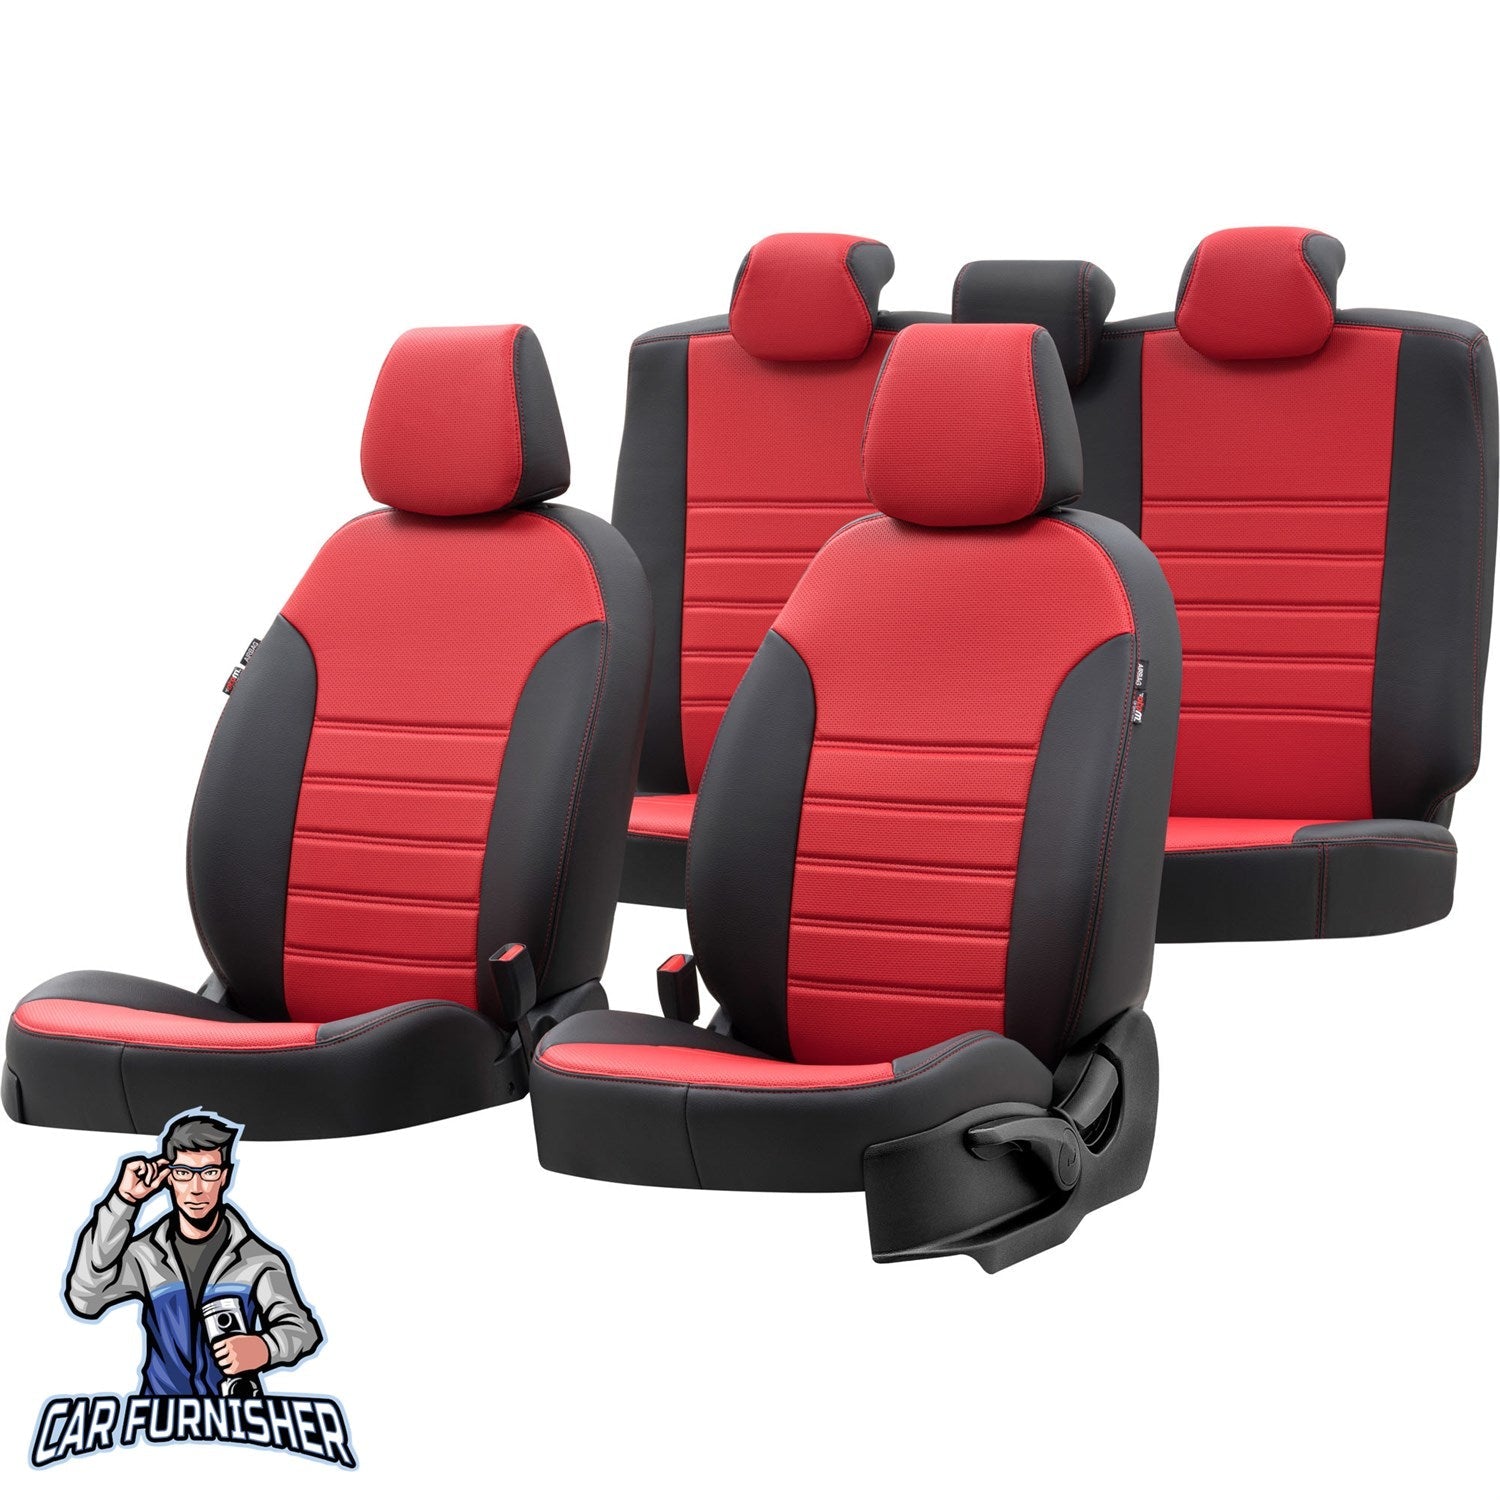 Volvo S60 Car Seat Cover 2000-2018 T4/T5/T6/T8/D5 New York Design Red Full Set (5 Seats + Handrest) Leather & Fabric